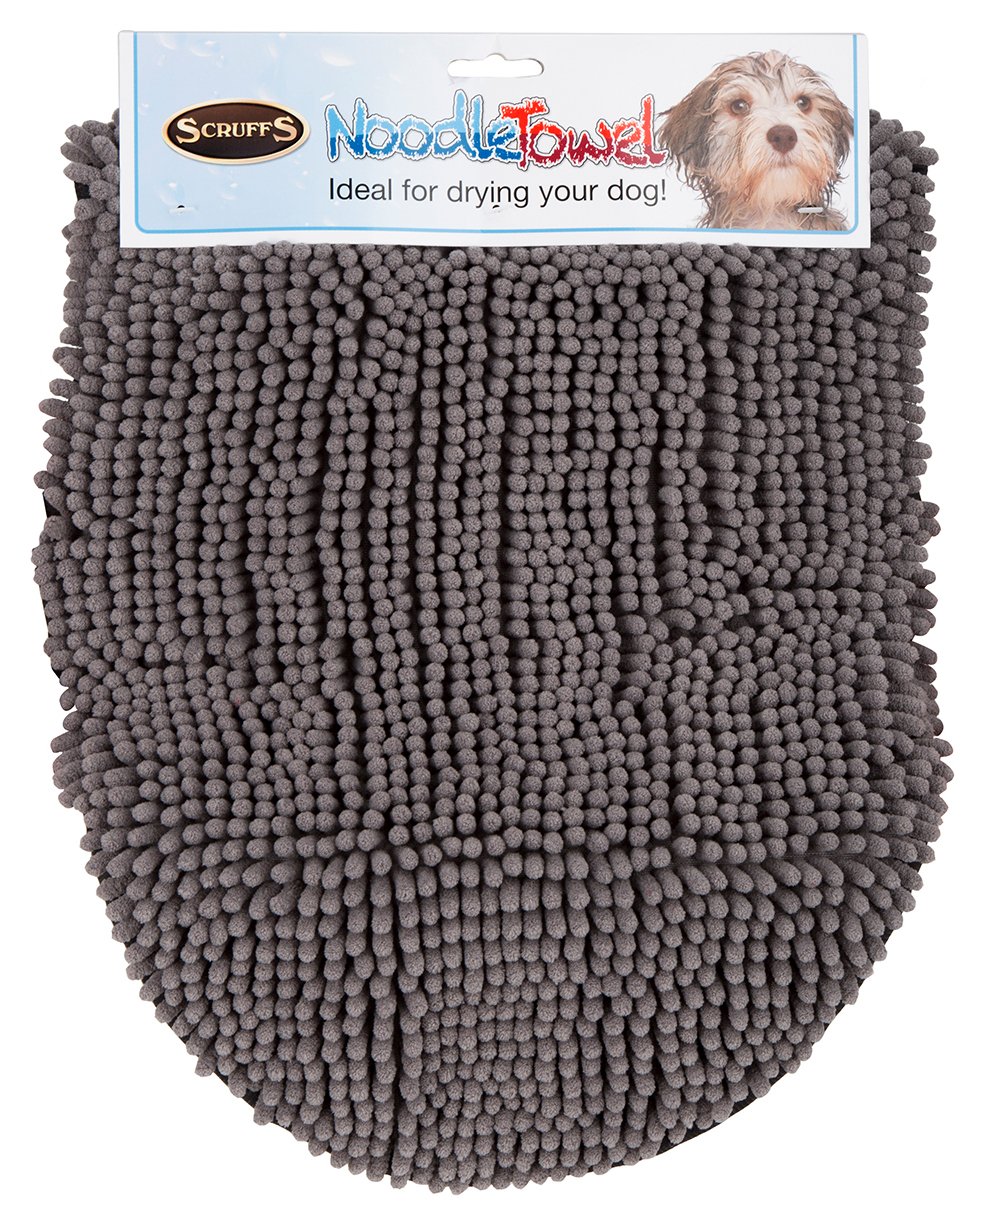 Scruffs Noodle Dog And Cat Drying Towel - Grey